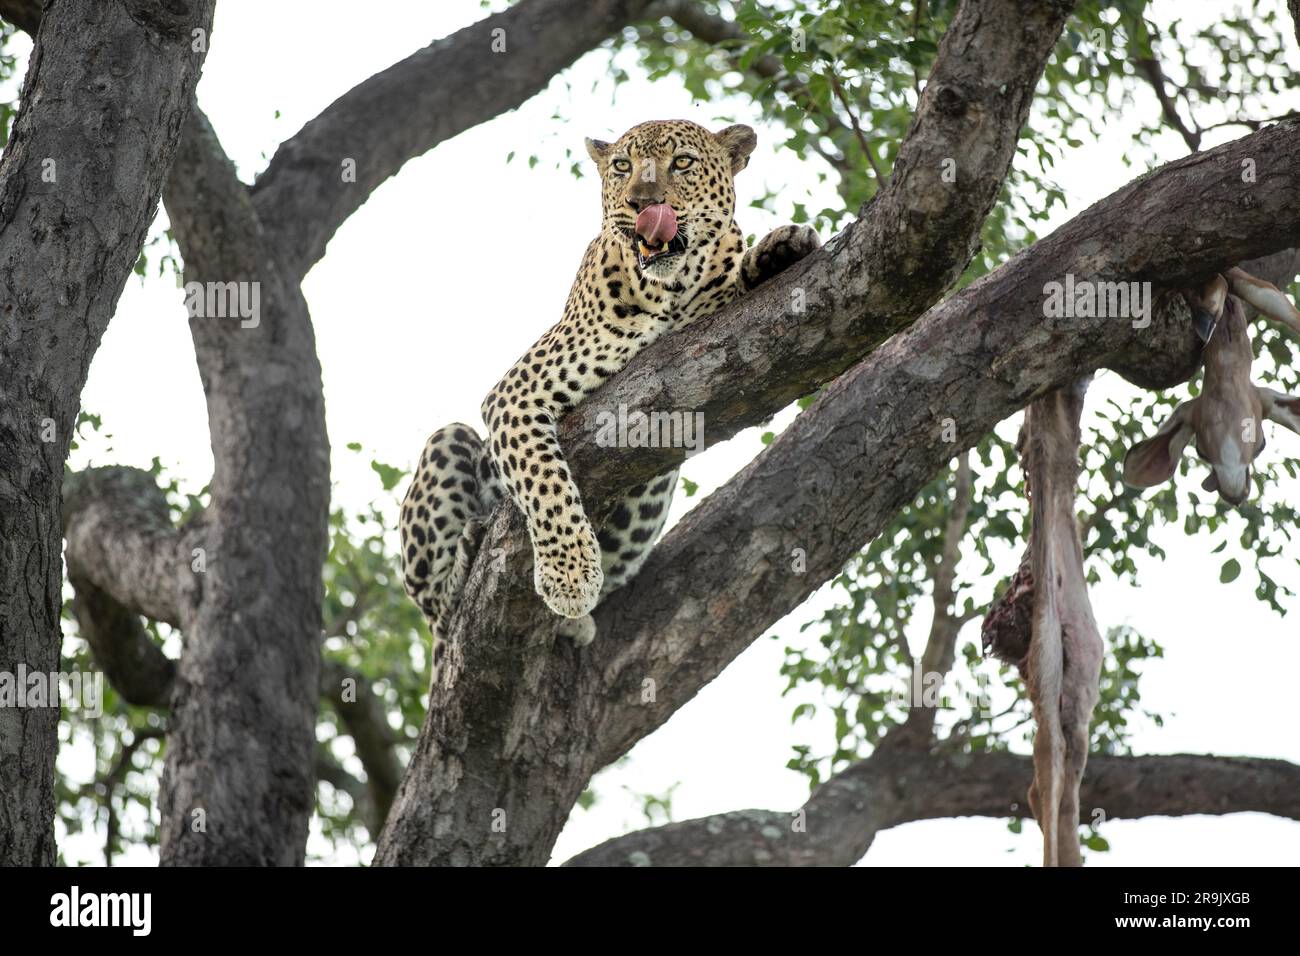 A leopard, Panthera pardus, lies down in a branch, with a hoisted carcass. Stock Photo